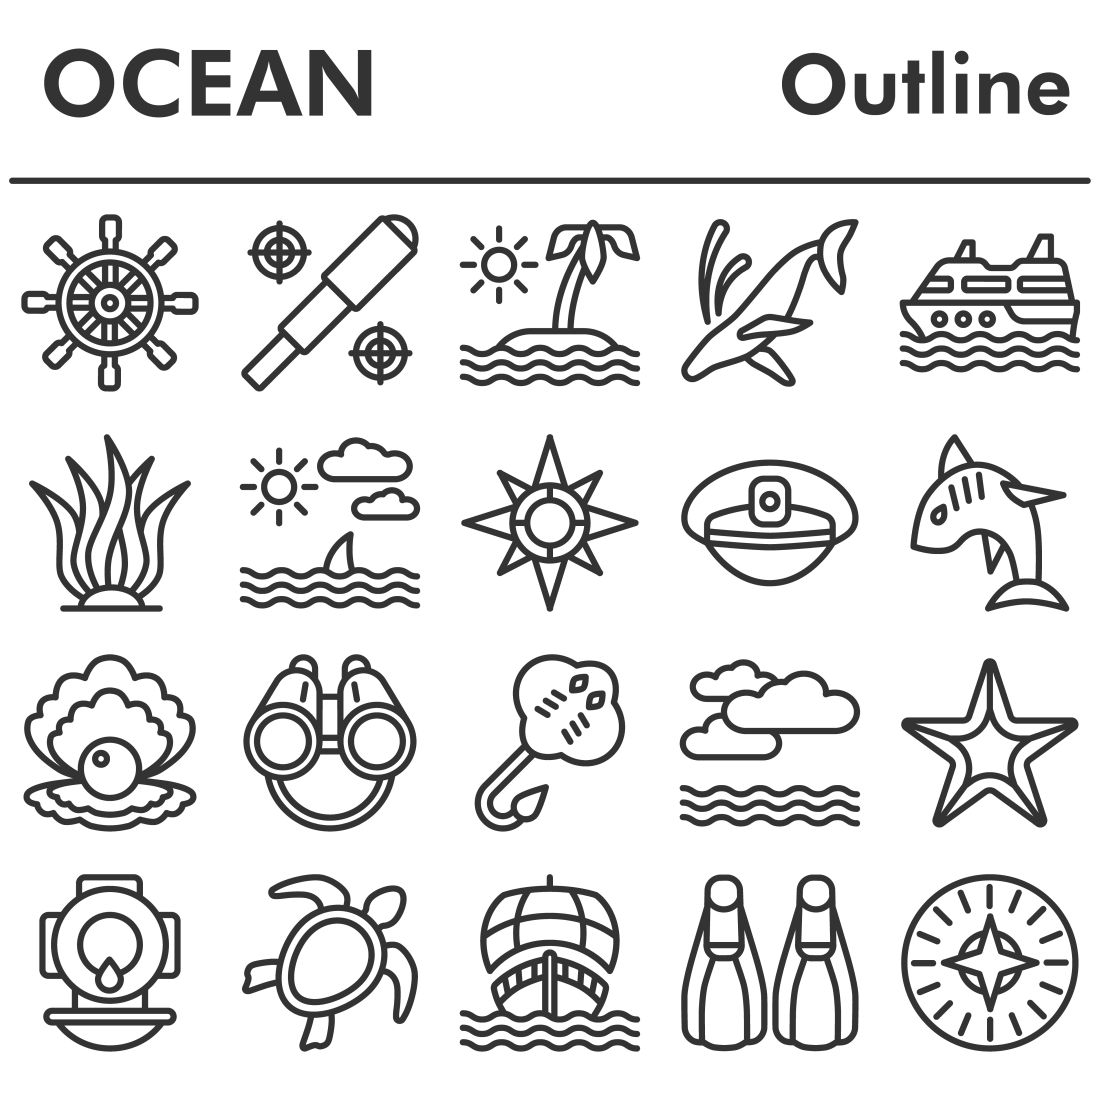 Black and white outline drawing of ocean related items.